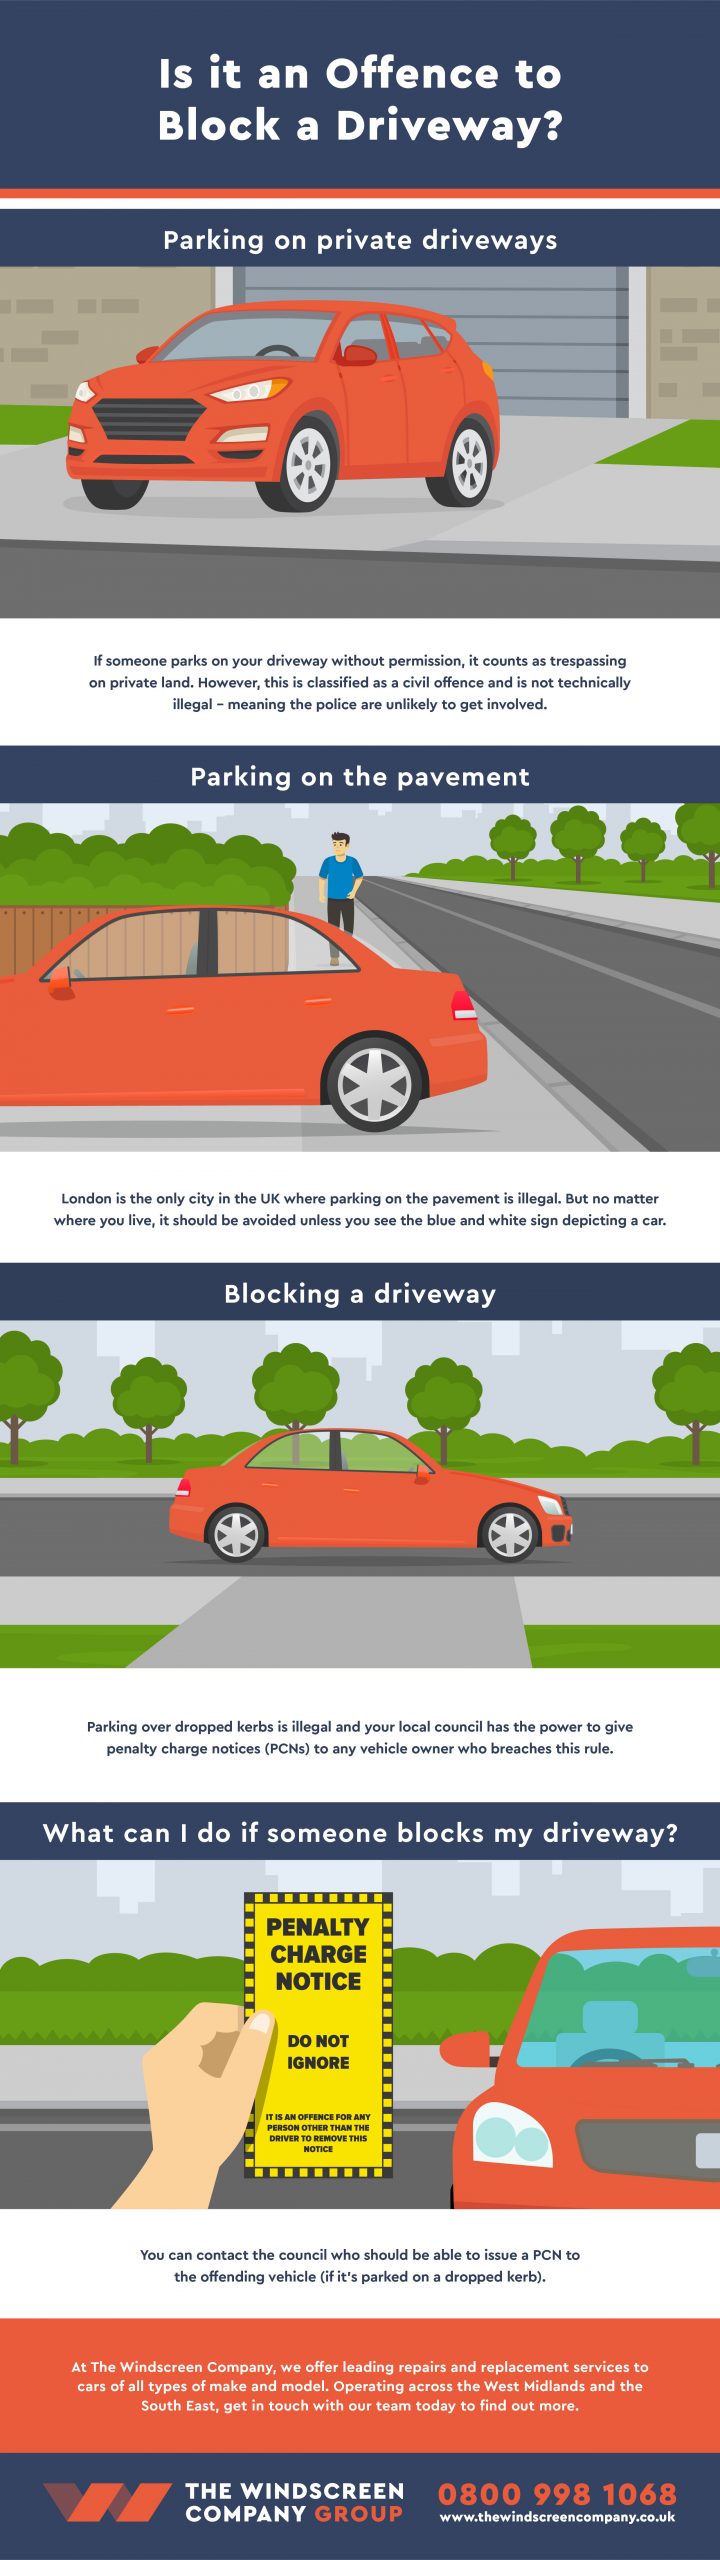 Is it an Offence to Block a Driveway - infographic